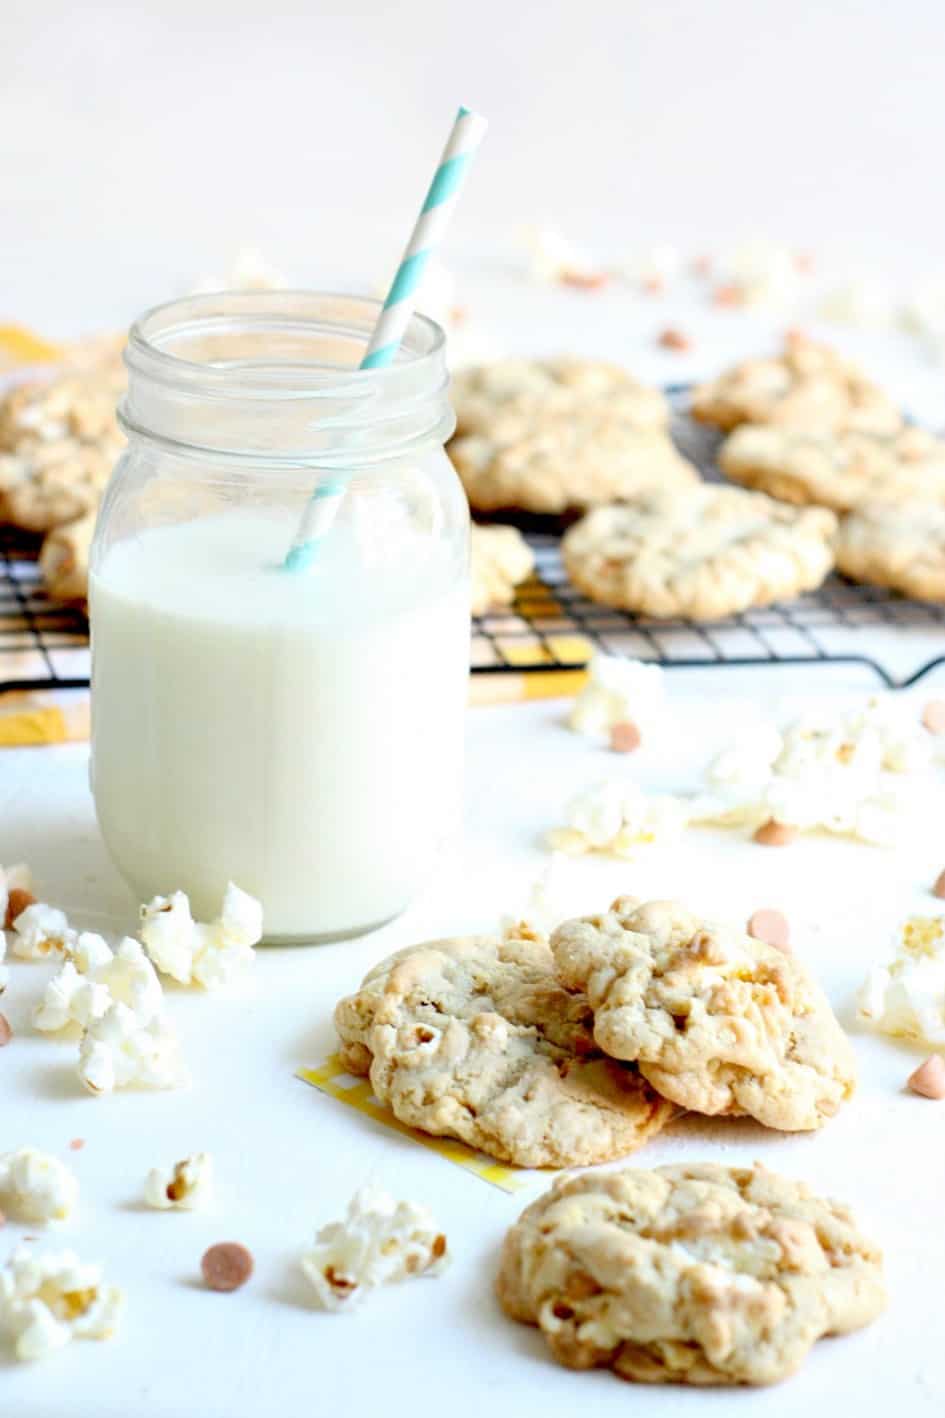 Buttered Popcorn and Butterscotch Cookies